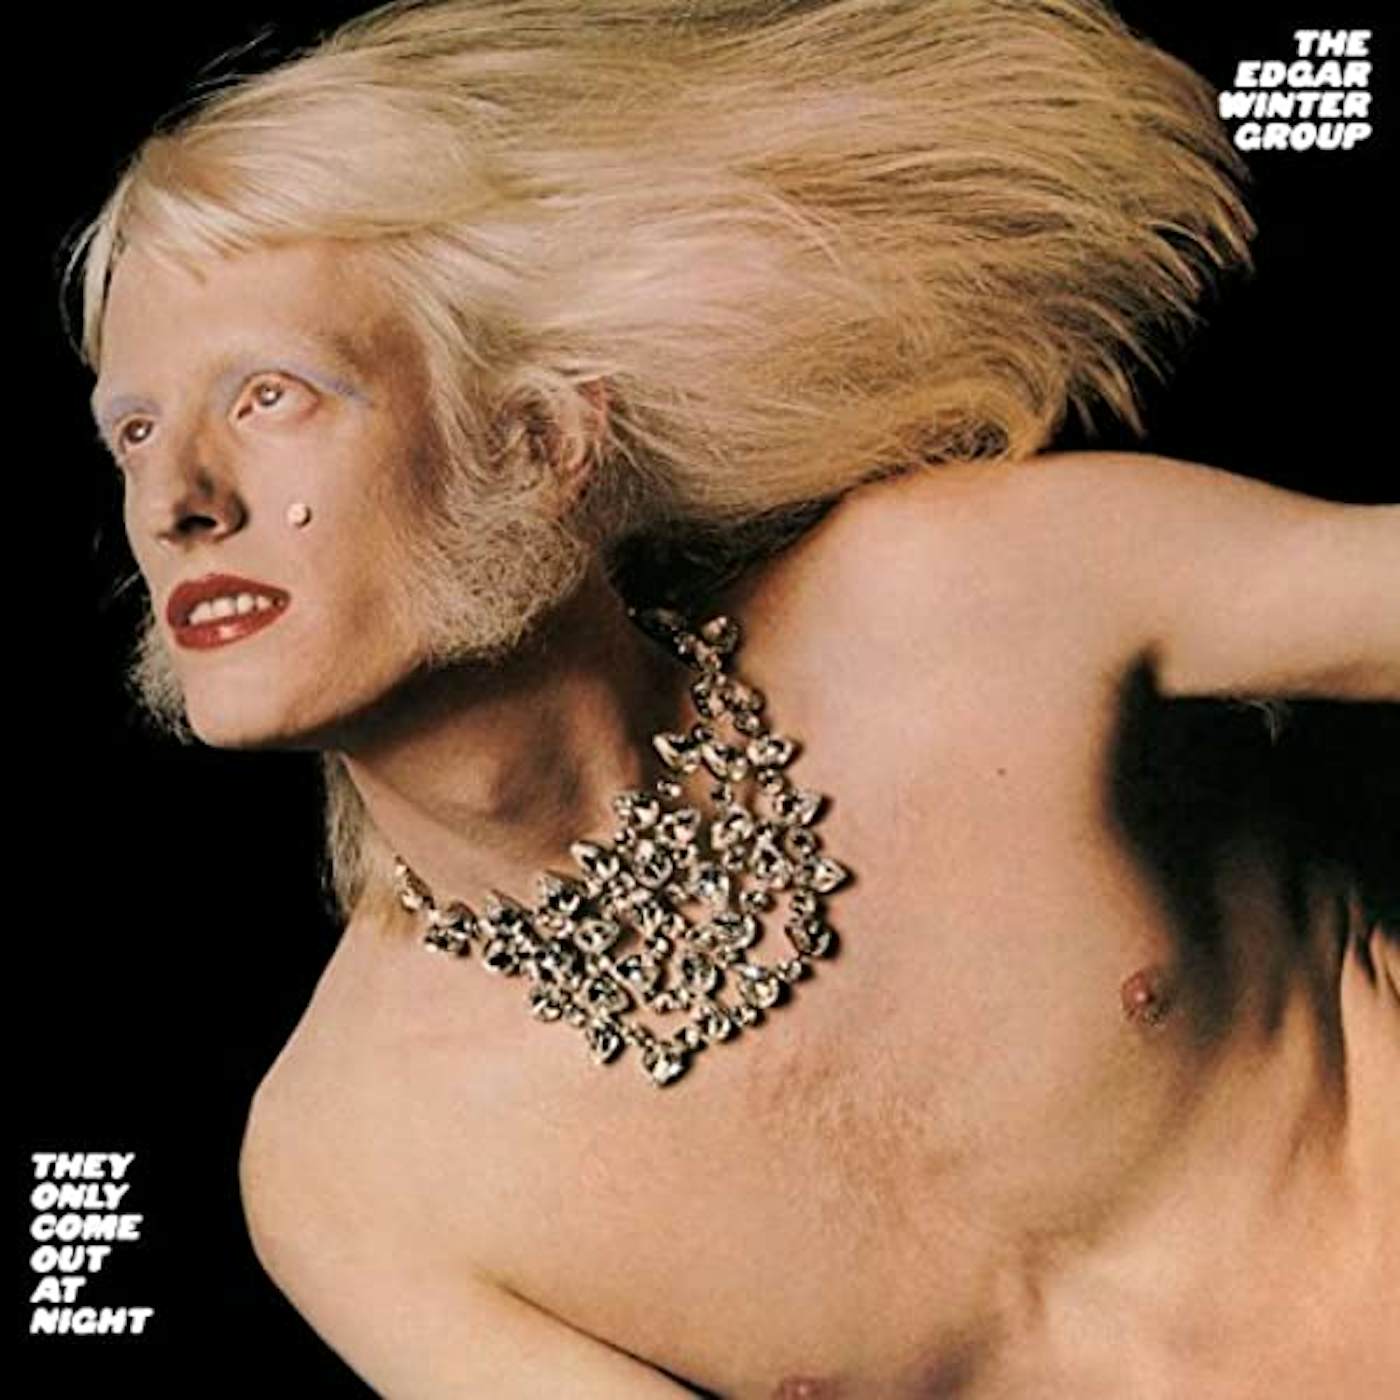 Edgar Winter THEY ONLY COME OUT AT NIGHT (180G) Vinyl Record